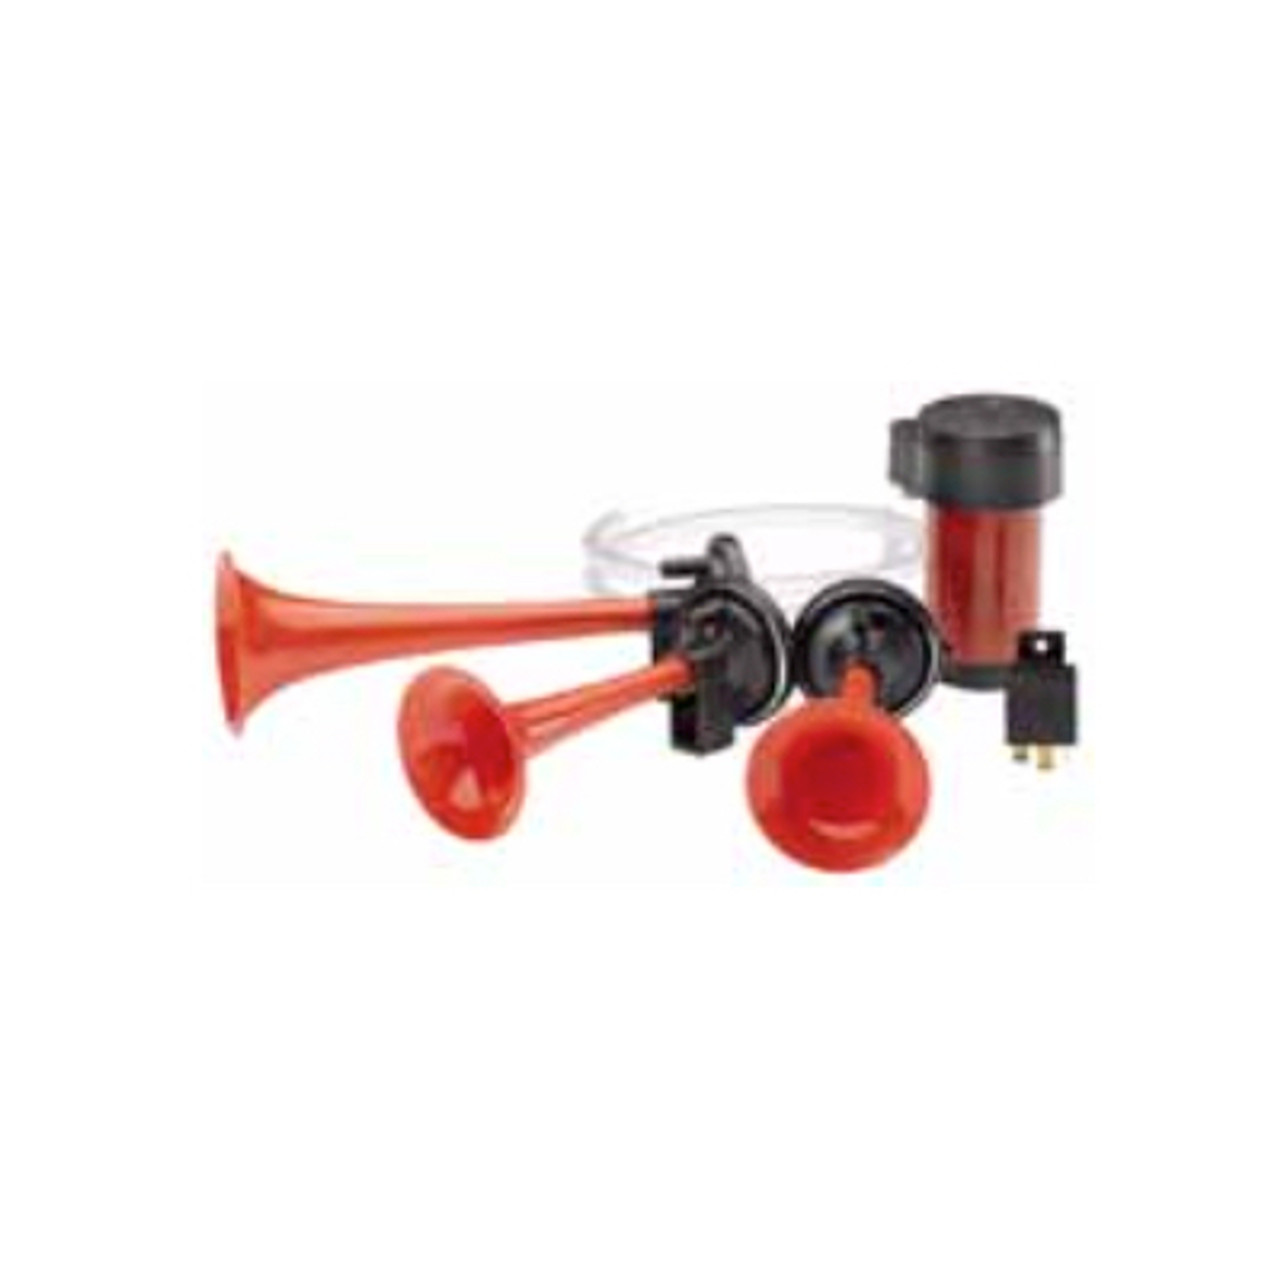 HELLA 003001671 Triple-Tone Horn Kit with 12V Air Compressor and Mounting  Bracket